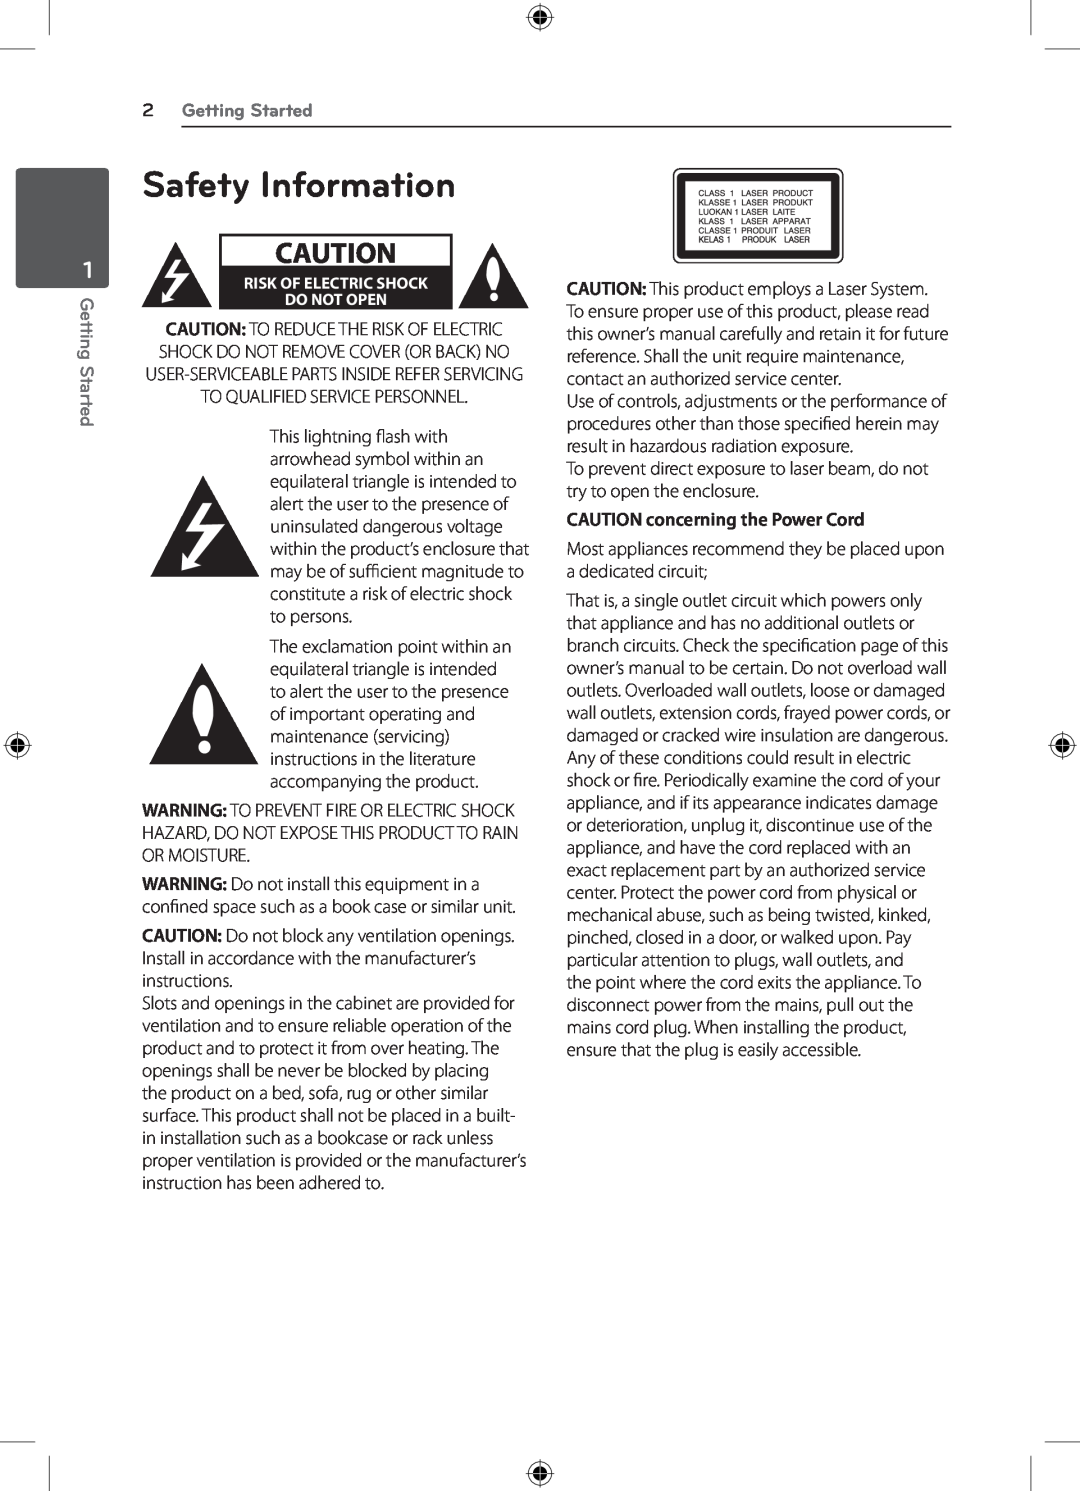 LG Electronics DH4220S owner manual Safety Information, Getting Started, CAUTION concerning the Power Cord 